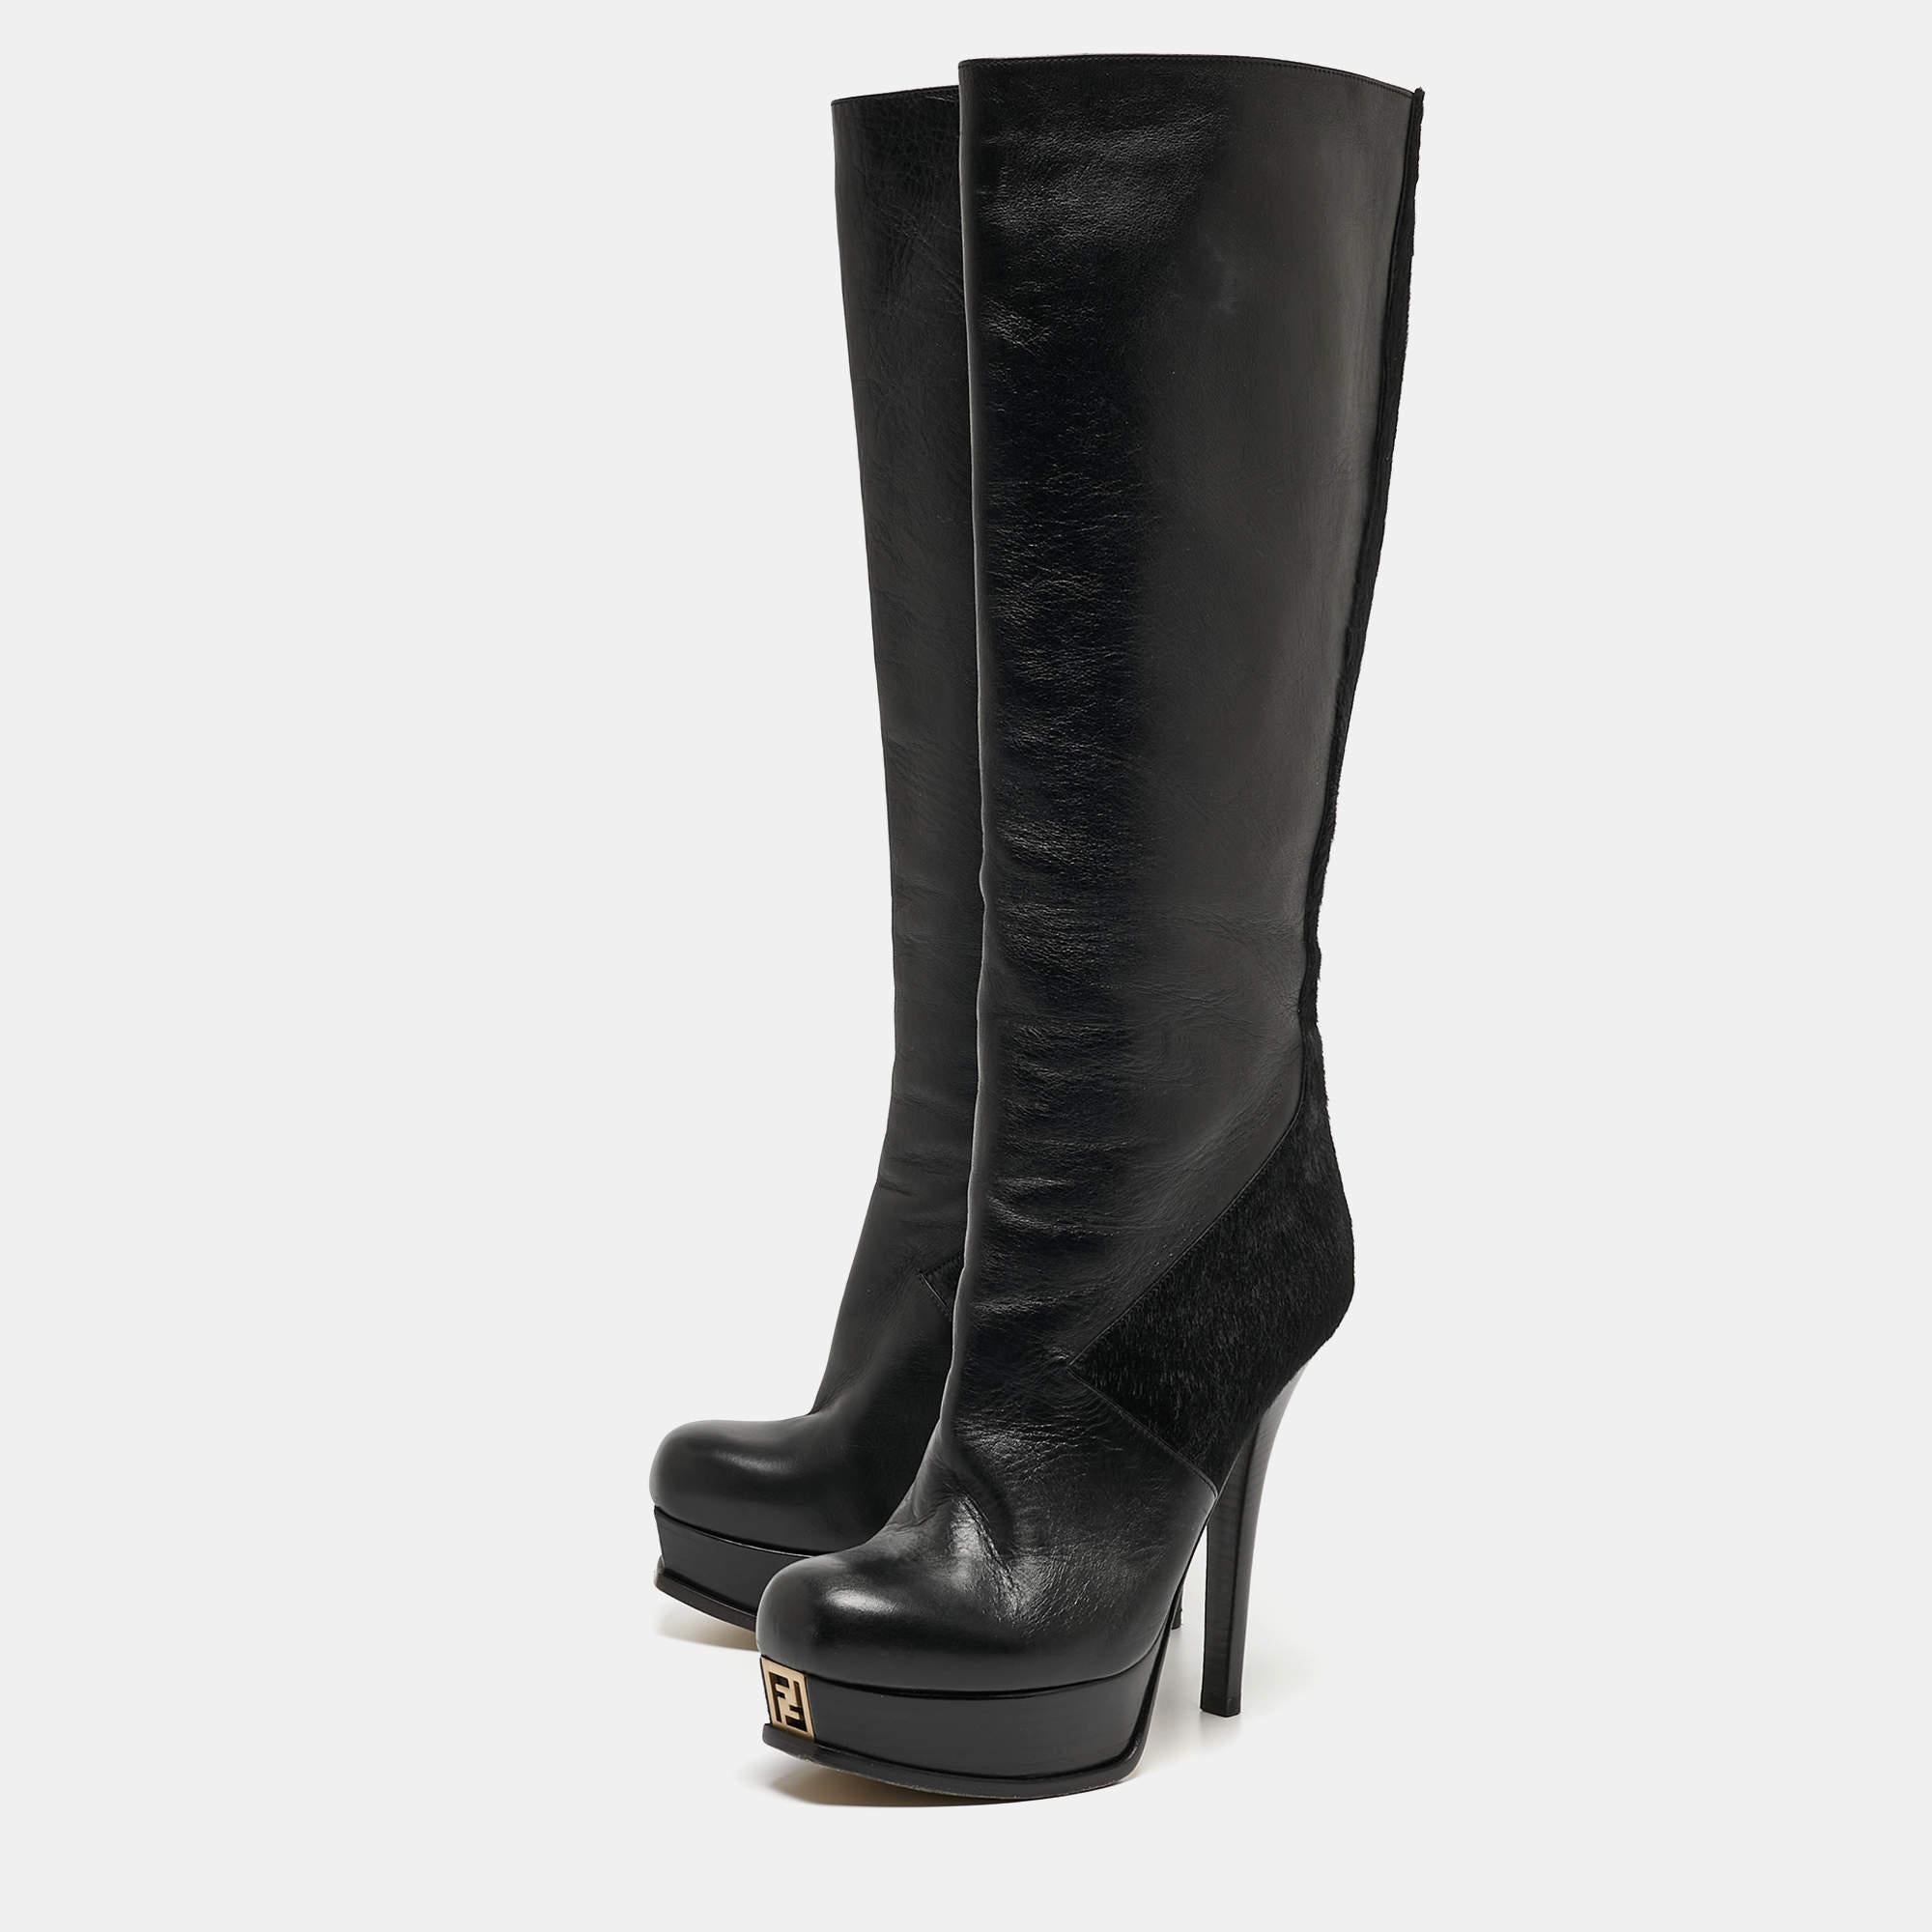 Give your outfit a chic update with this pair of Fendi knee-length boots. The creation is sewn perfectly using leather and added with logo accents, back zippers, and 14 cm heels. Make a statement in these!

